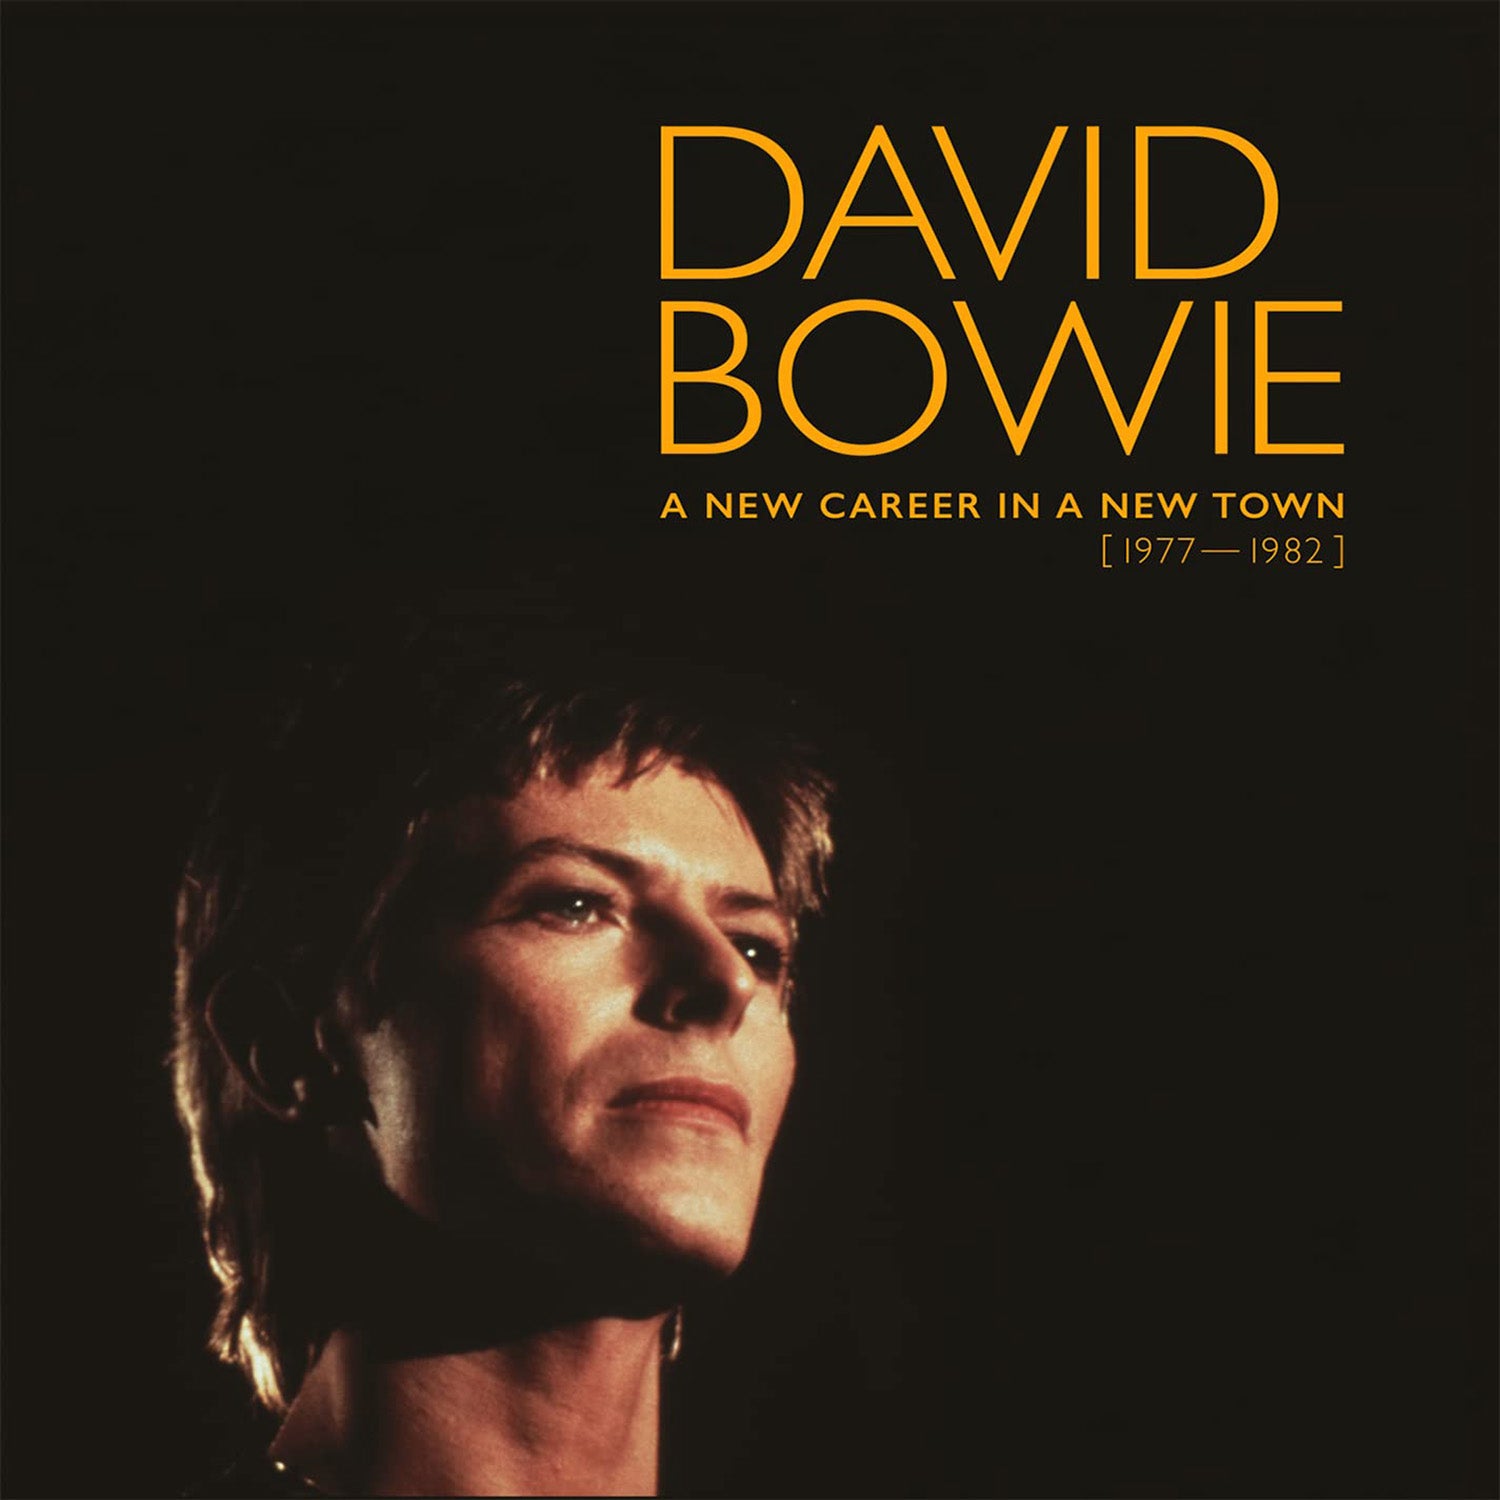 David Bowie - A New Career In A New Town Vinyl Box Set